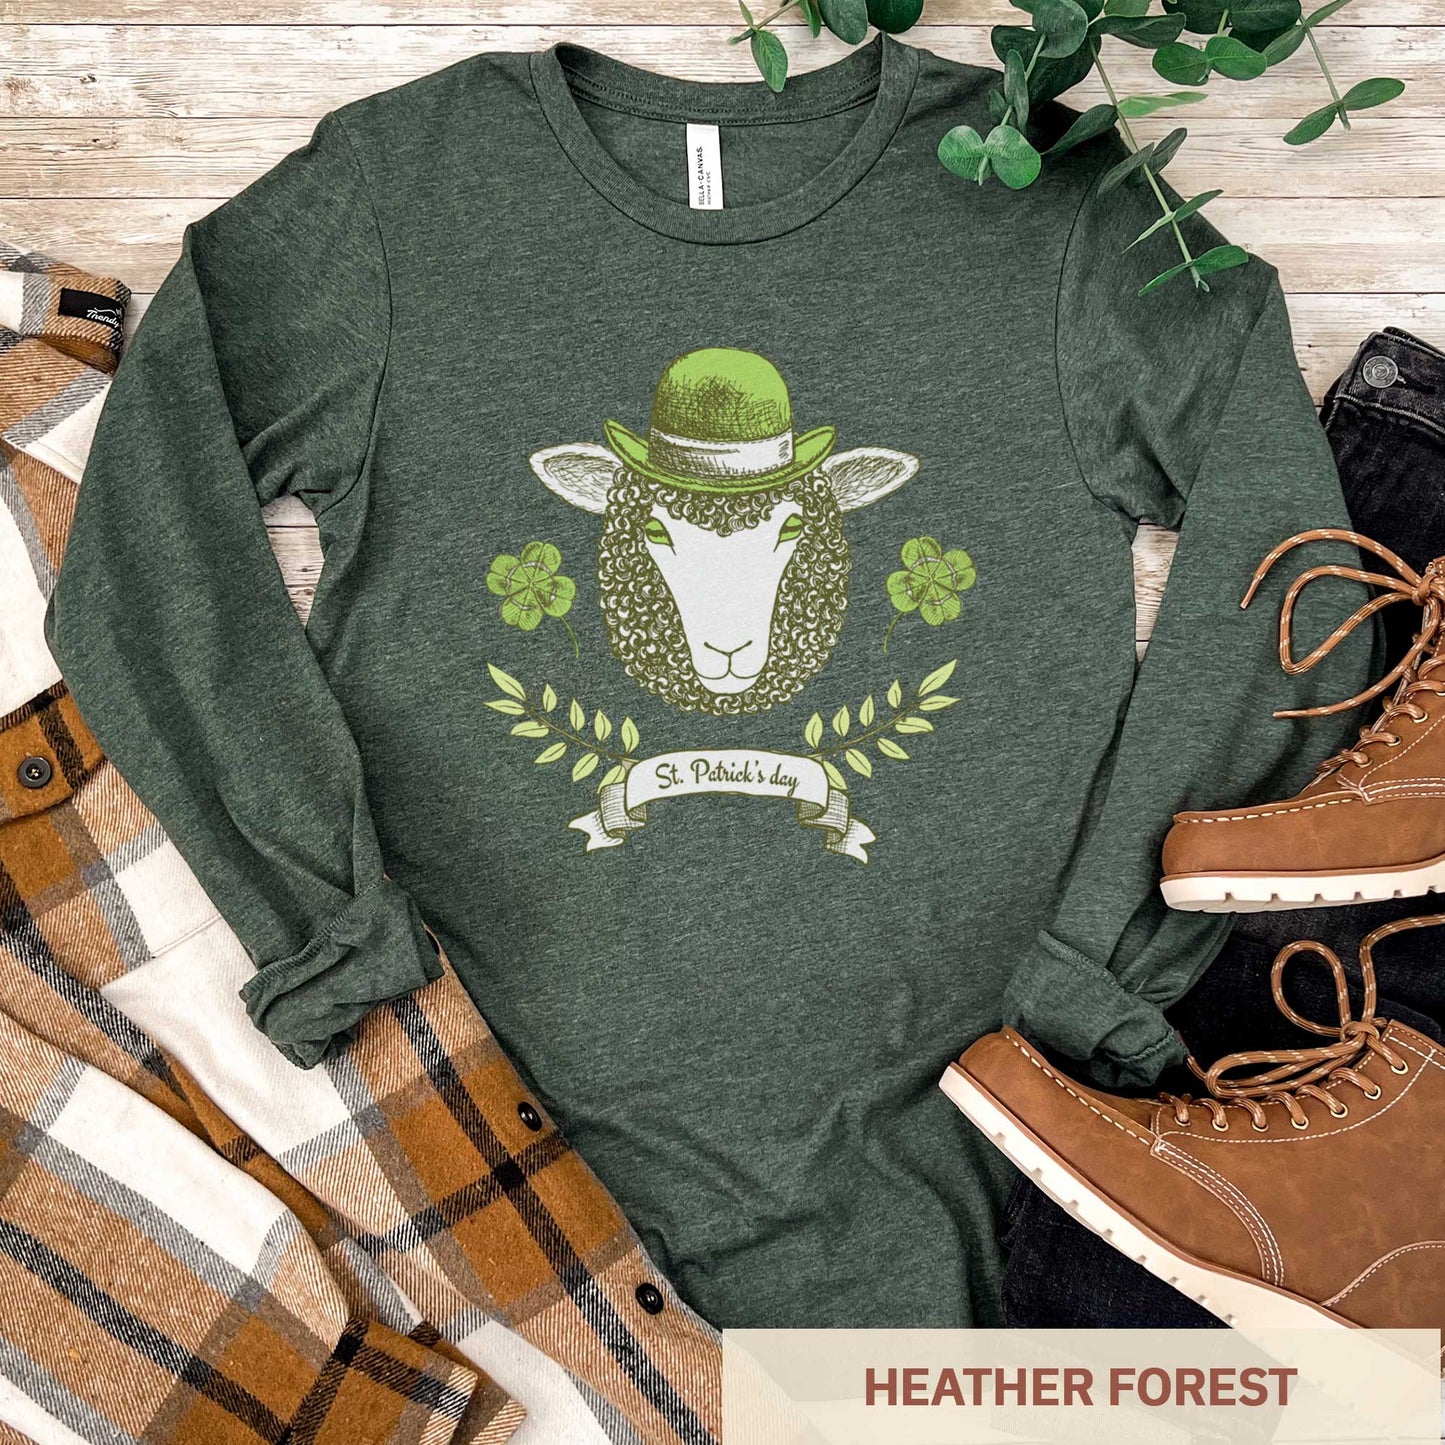 A long sleeved heather forest Bella Canvas t-shirt featuring a sheep with a green hat, clovers and the words St.Patrick's Day.